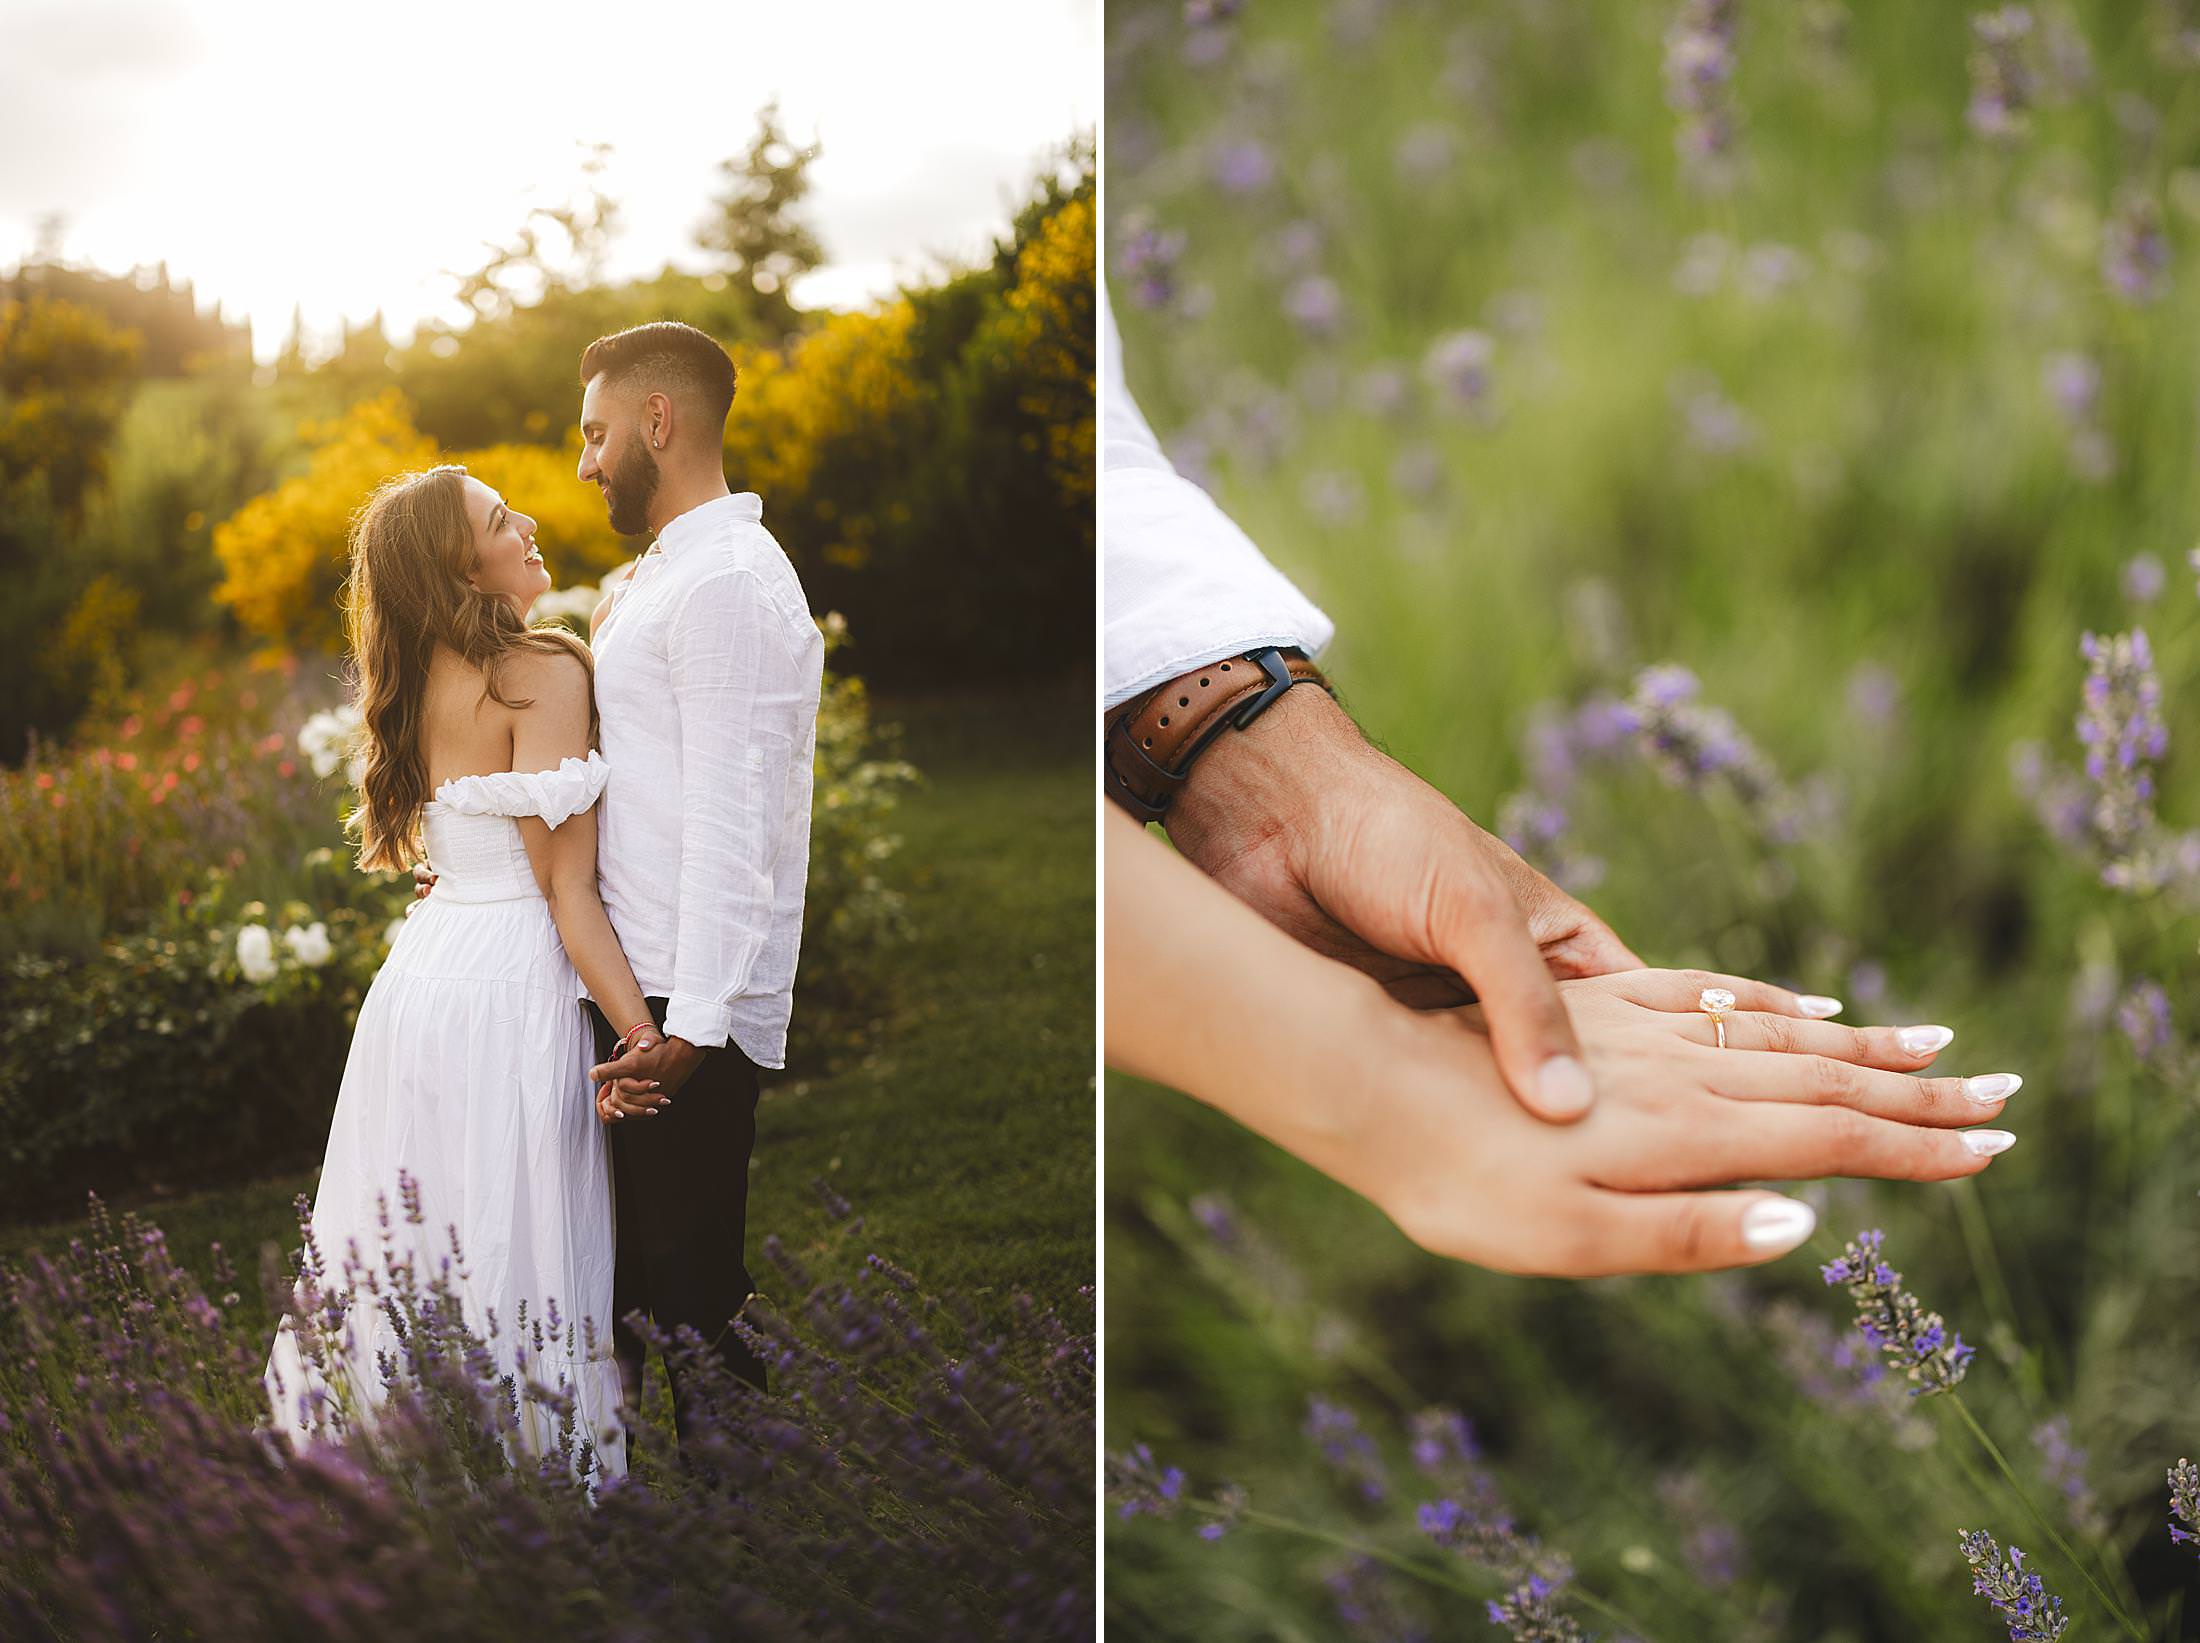 Romantic couple photo session in Chianti countryside during golden hour at Borgo del Cabreo